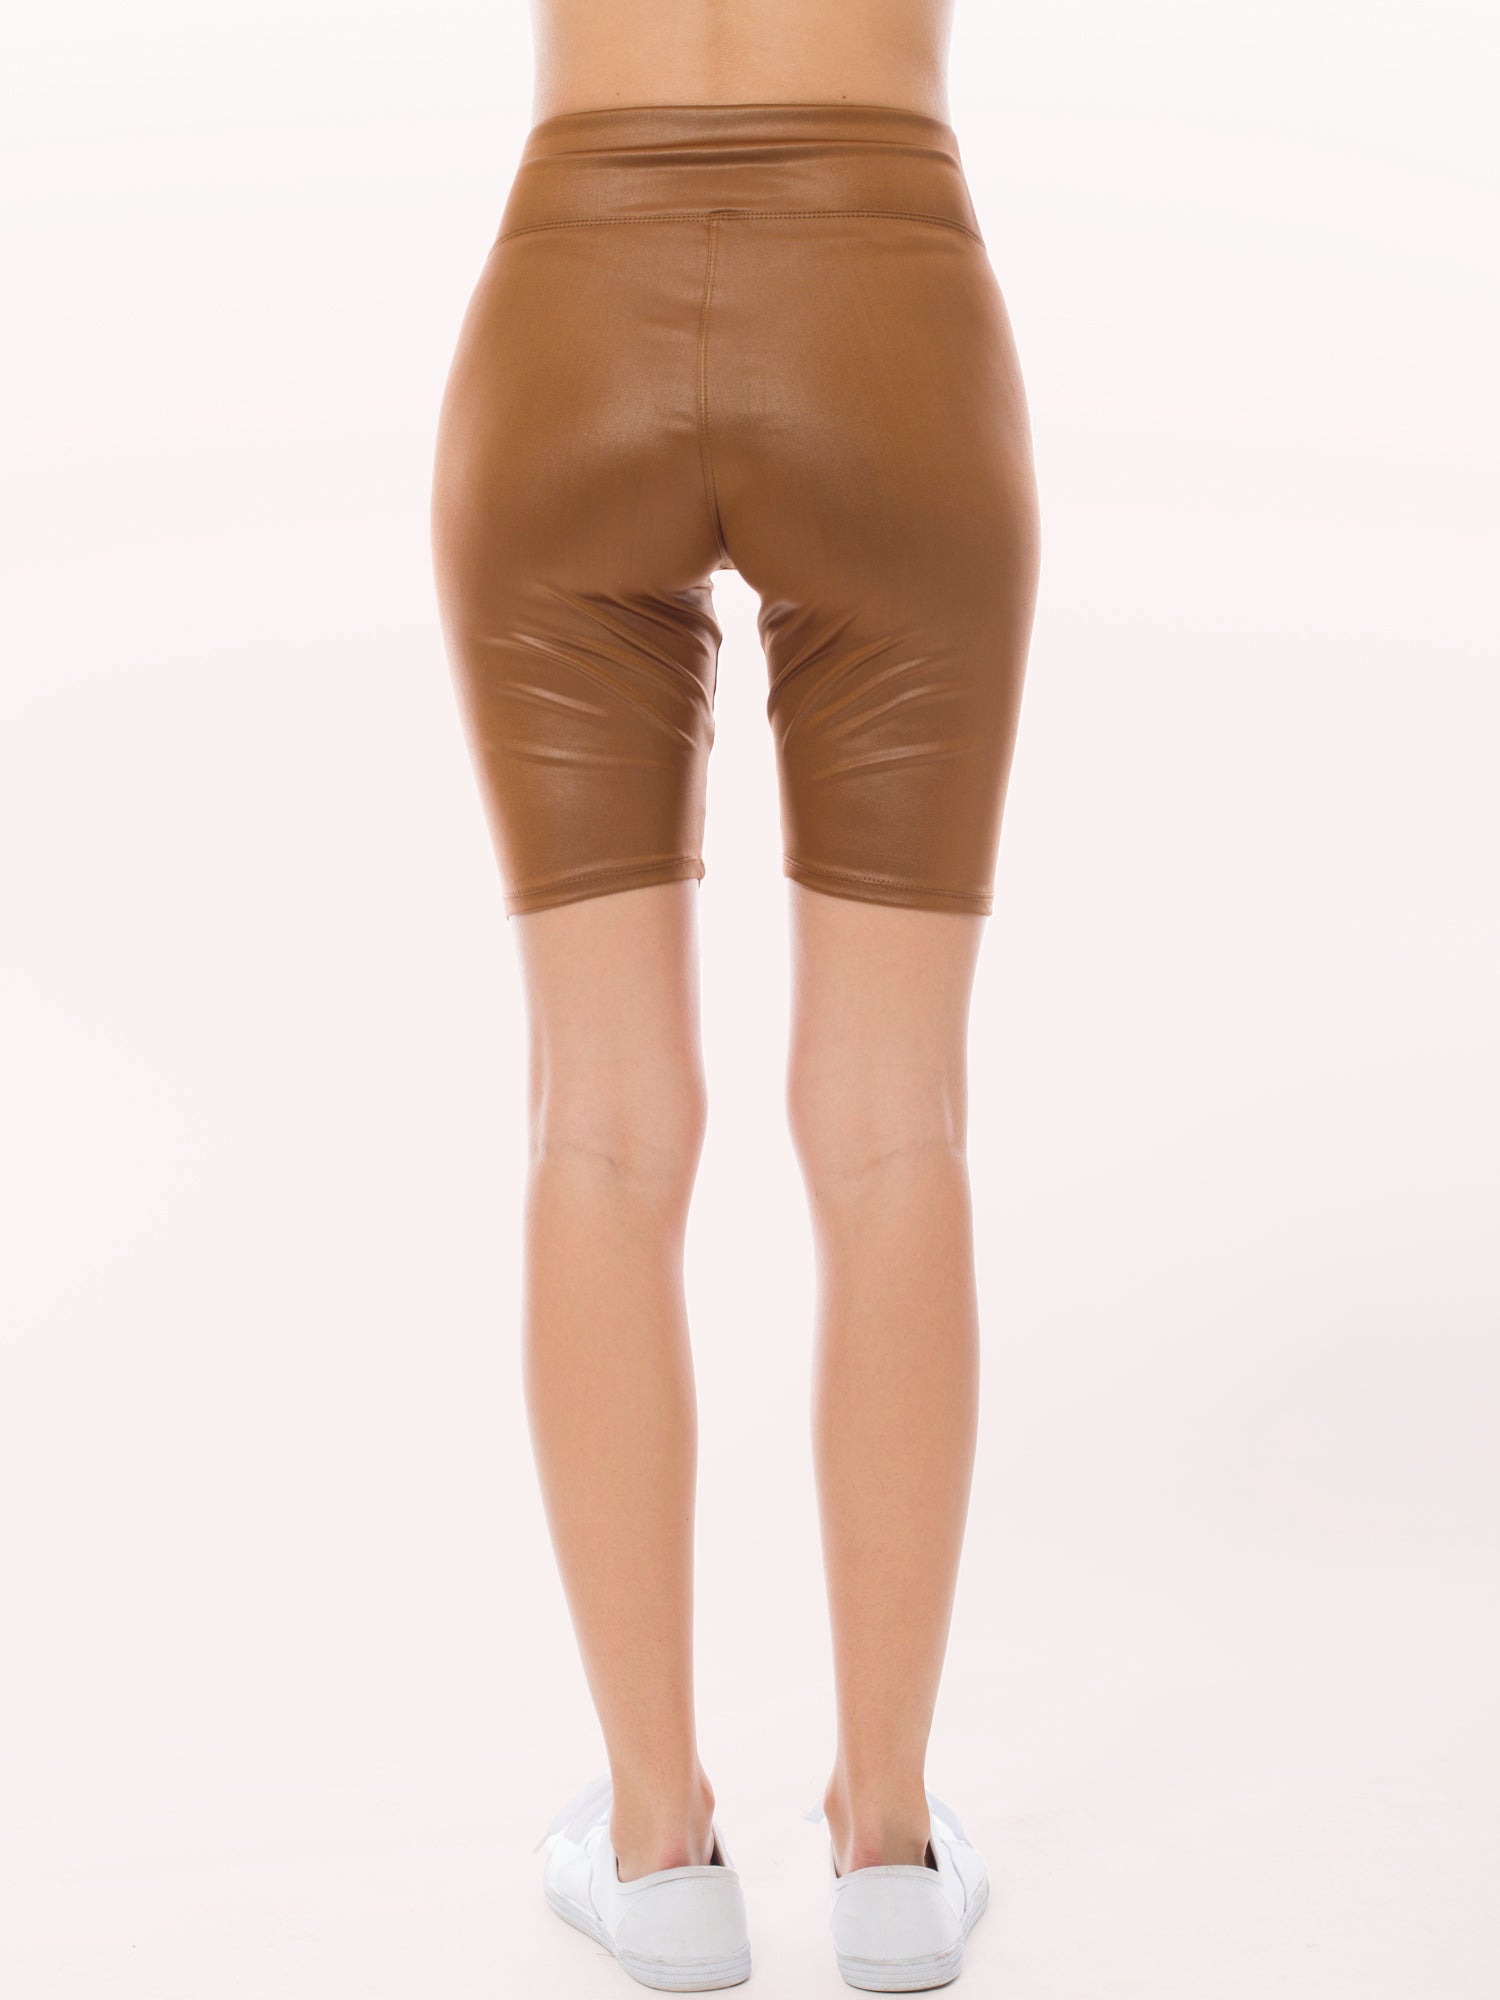 Comfortable Faux Leather Biker Shorts with Stretchy Elastic Band